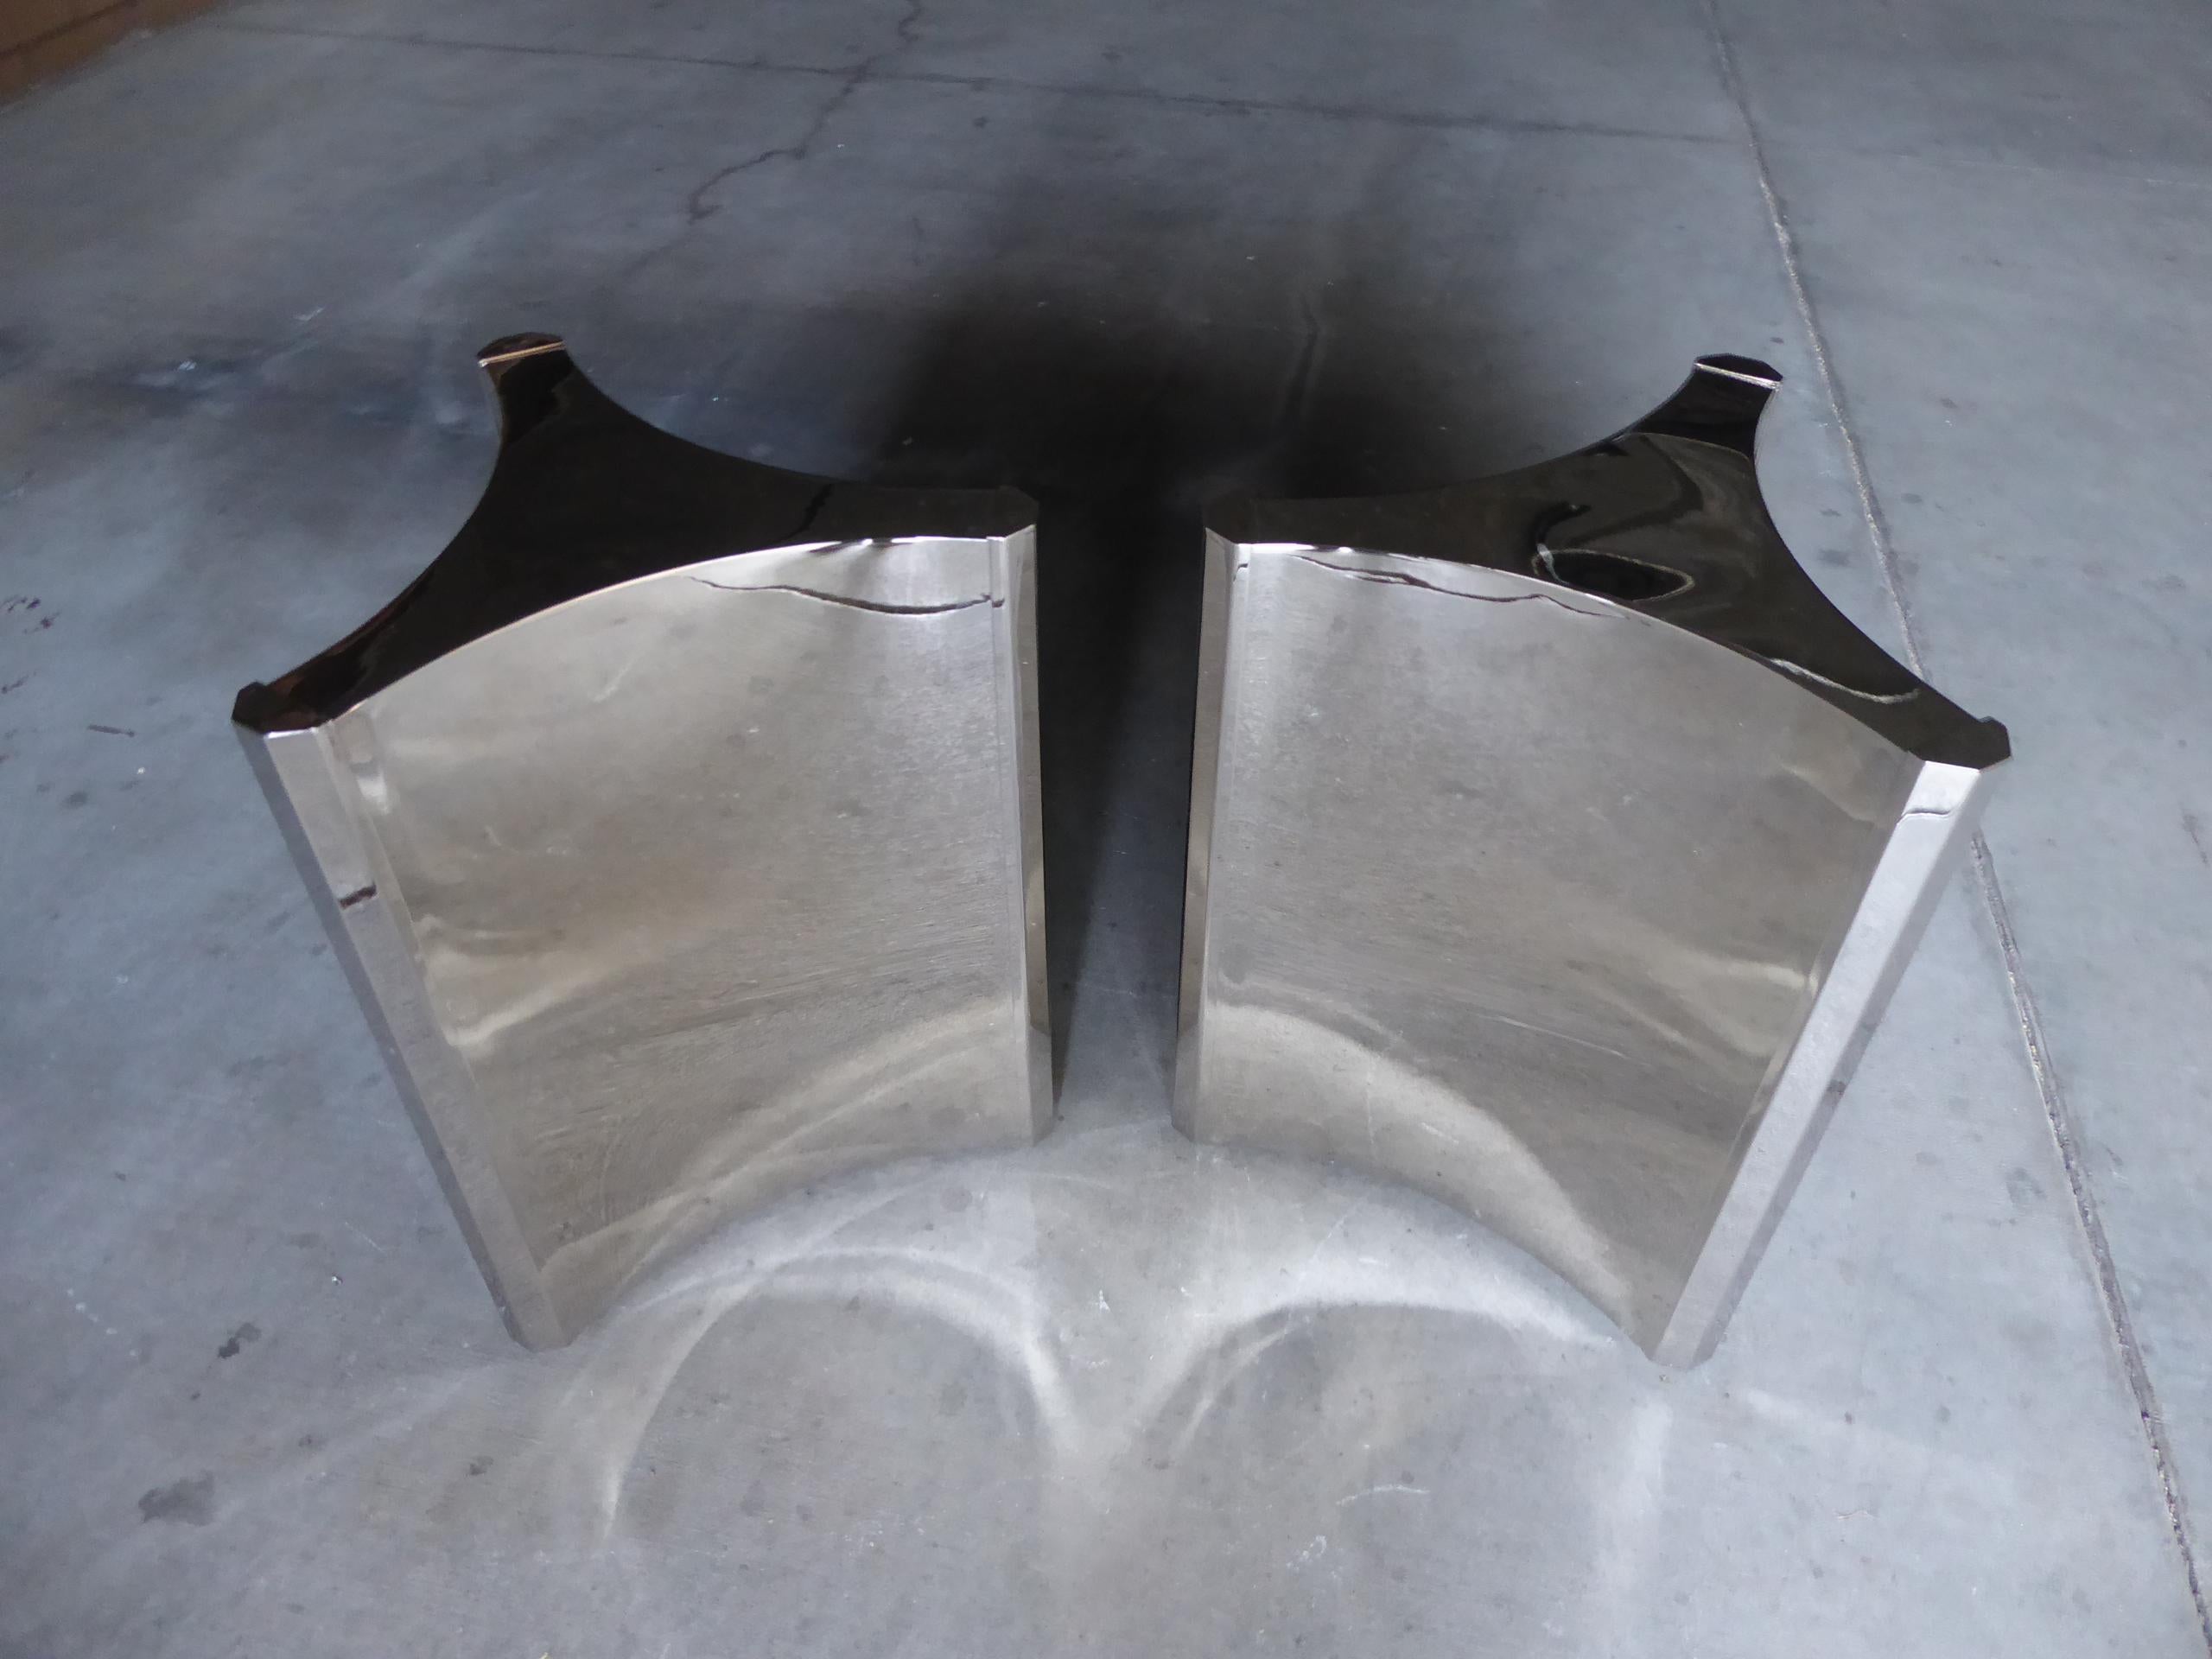 A pair of nickel-plated steel trilobi (three-sided) dining table bases made in the 1970s by Mastercraft. The bases have been recently nickel plated in a polished, mirror finish. These bases were made to hold a substantial glass top.
The dimensions